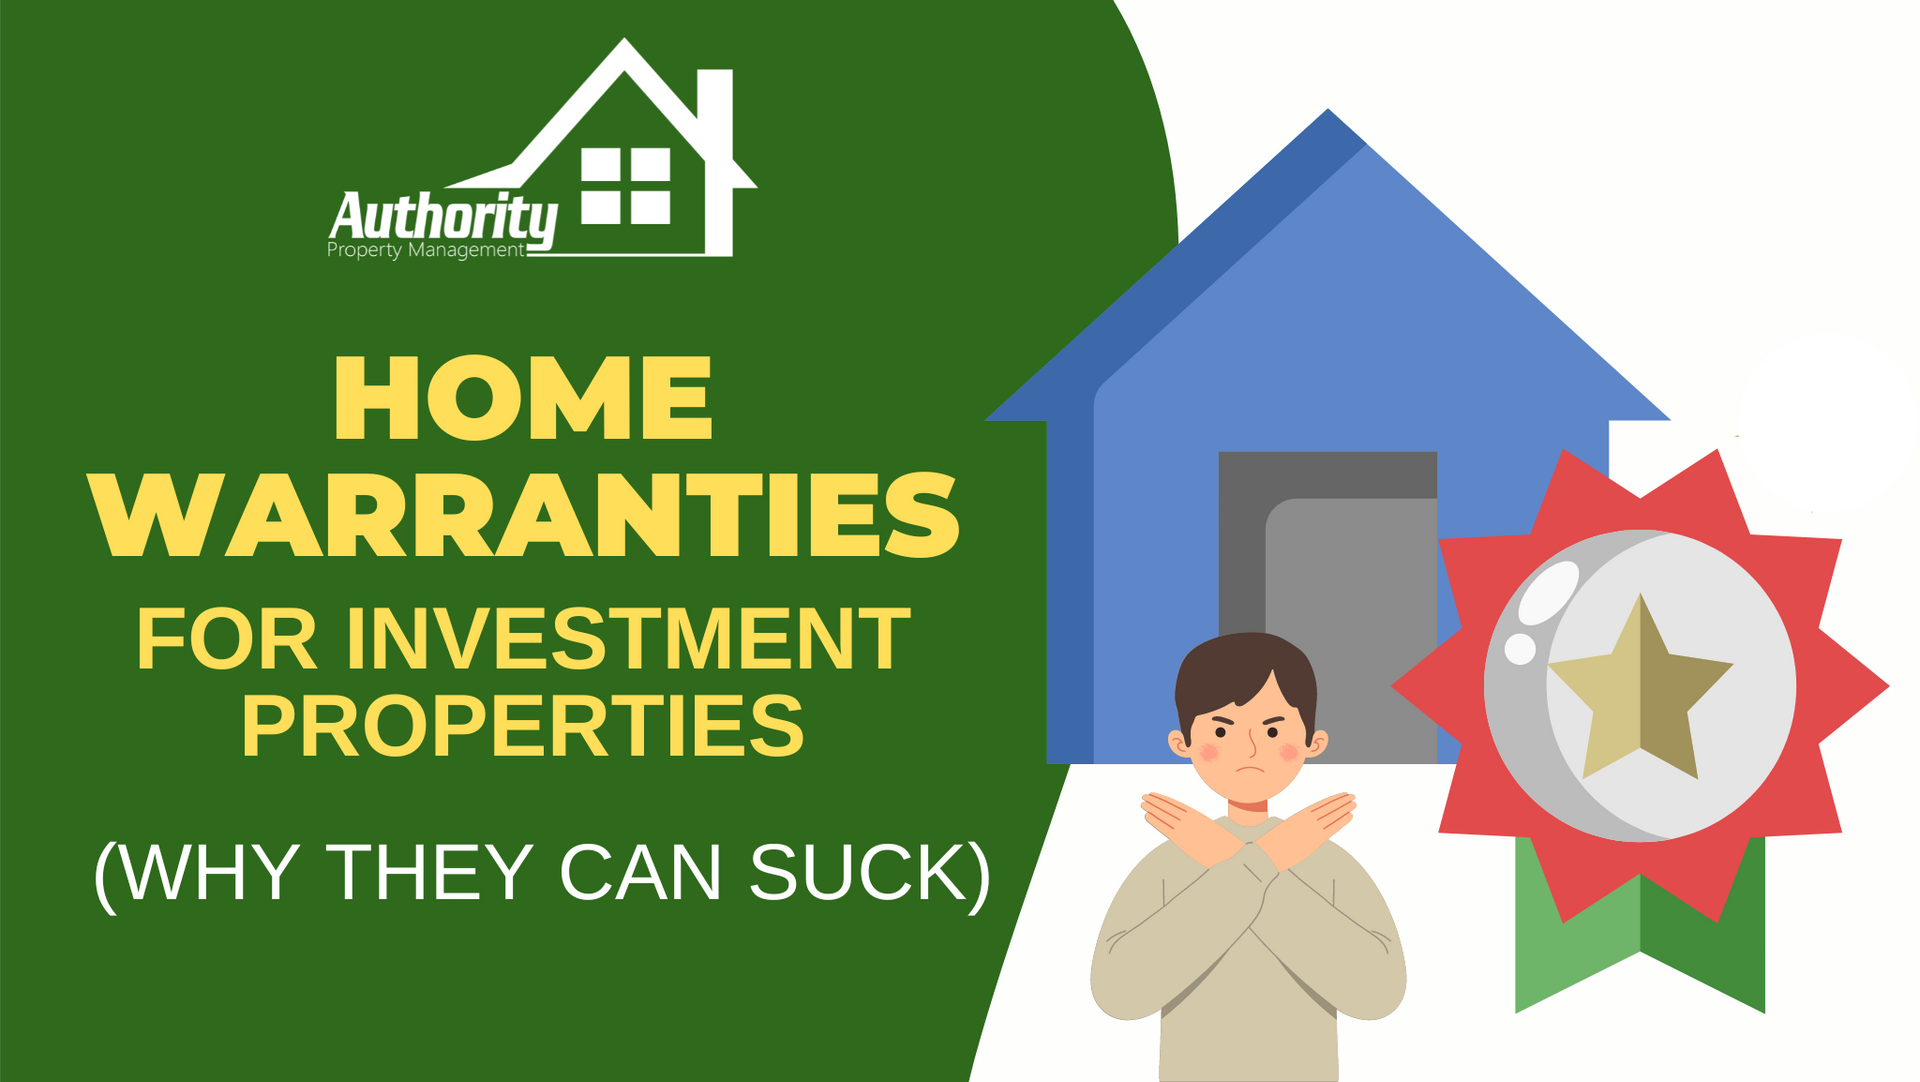 Home Warranties for Investment Properties: Why They Can Suck